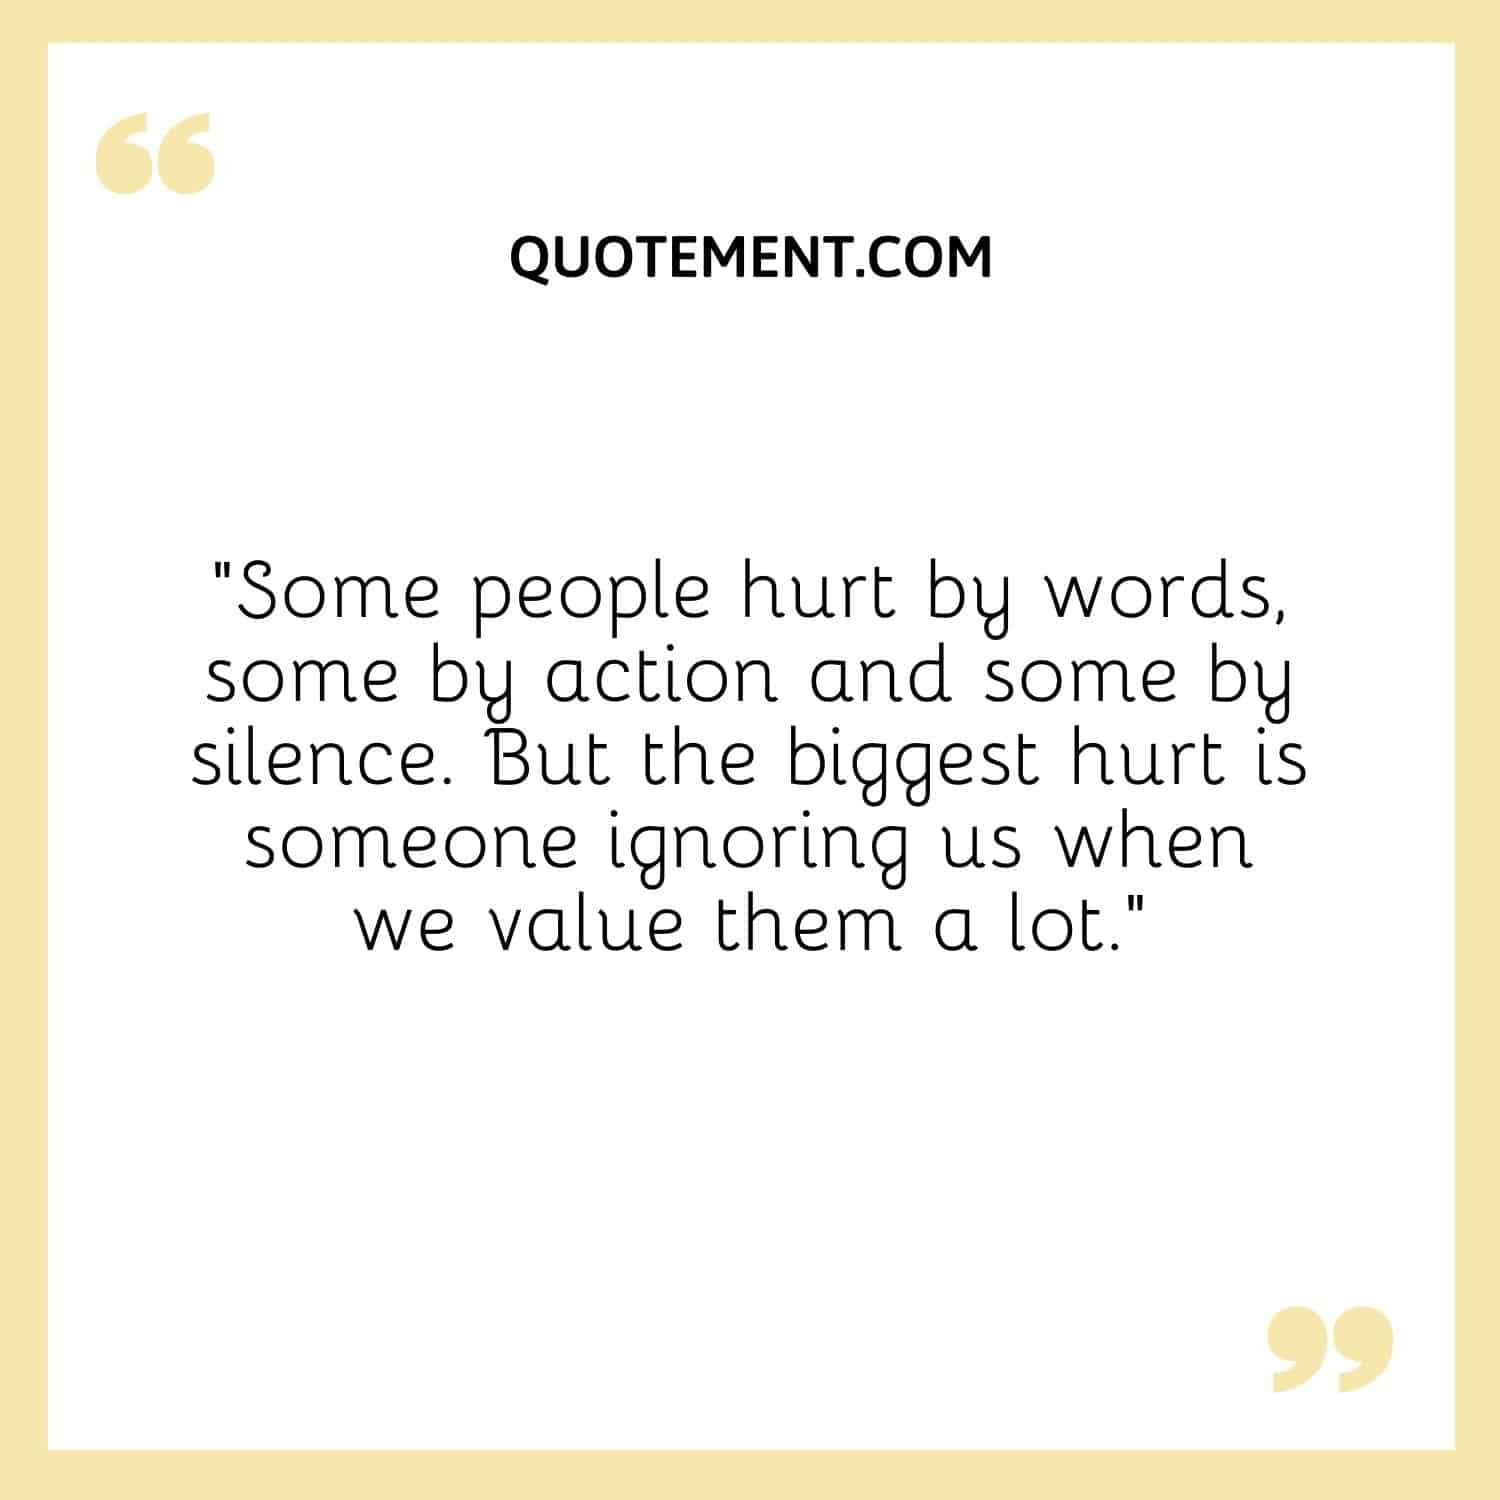 “Some people hurt by words, some by action and some by silence. But the biggest hurt is someone ignoring us when we value them a lot.”